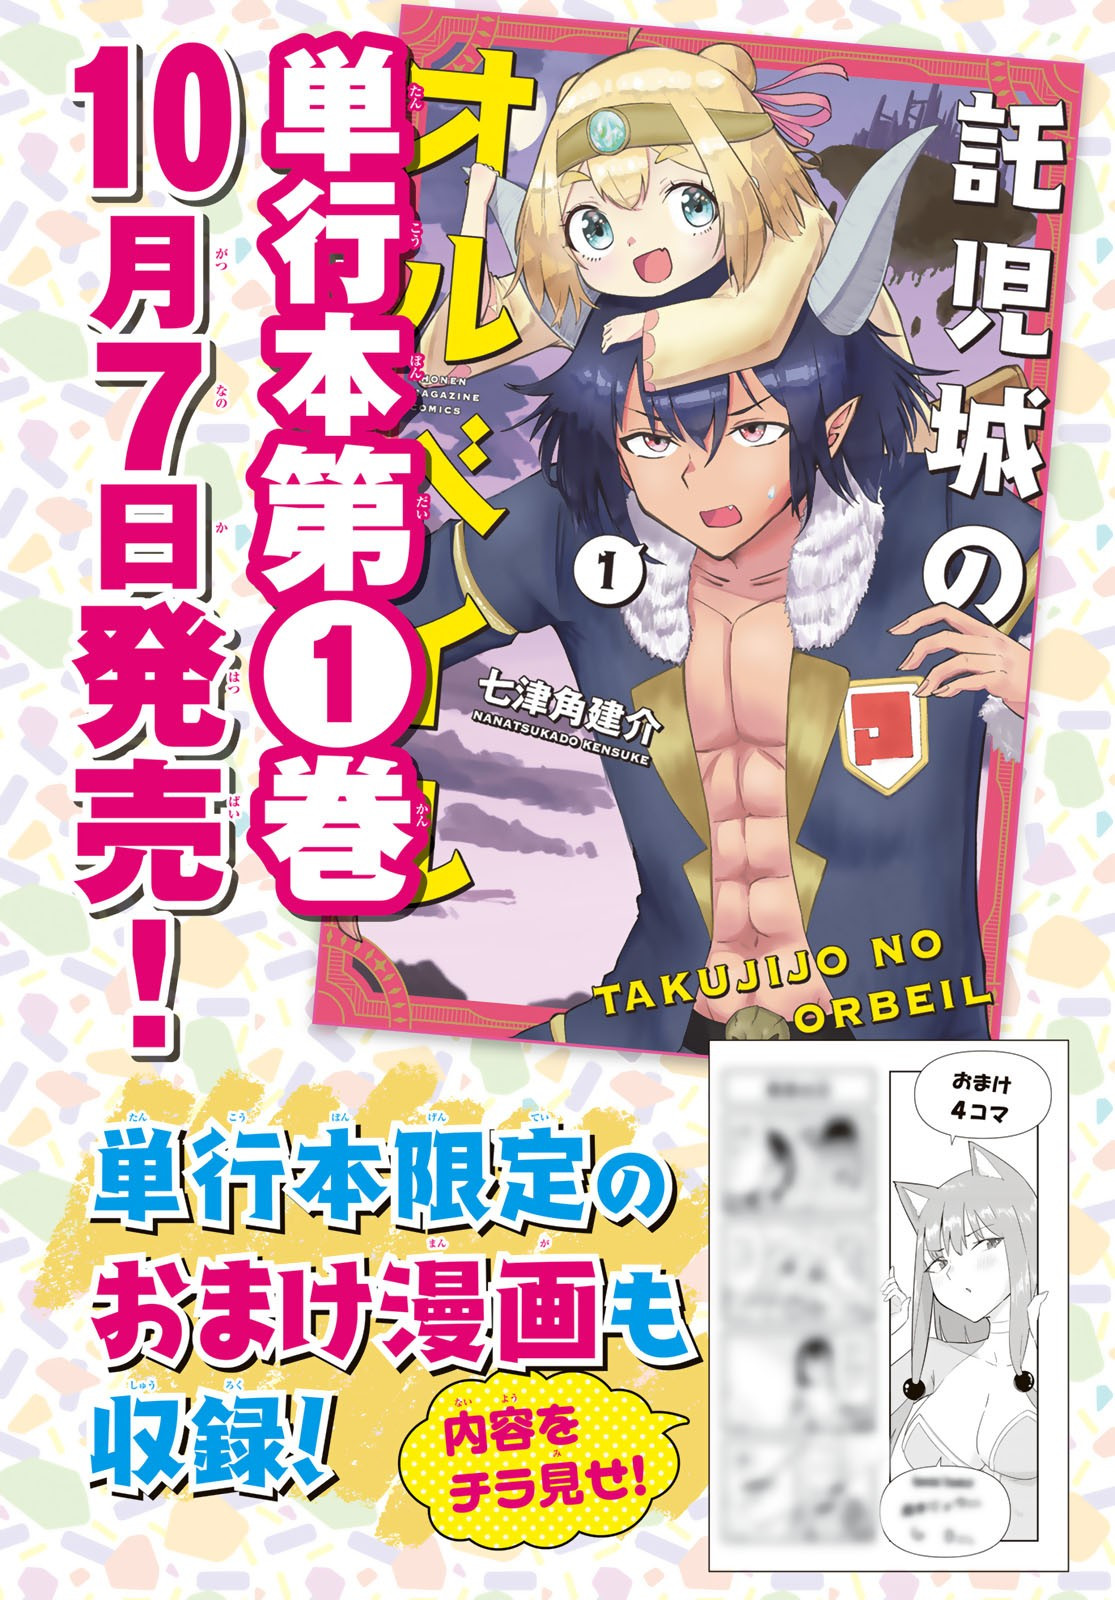 Weekly Shōnen Magazine - 週刊少年マガジン - Chapter 2022-45 - Page 532